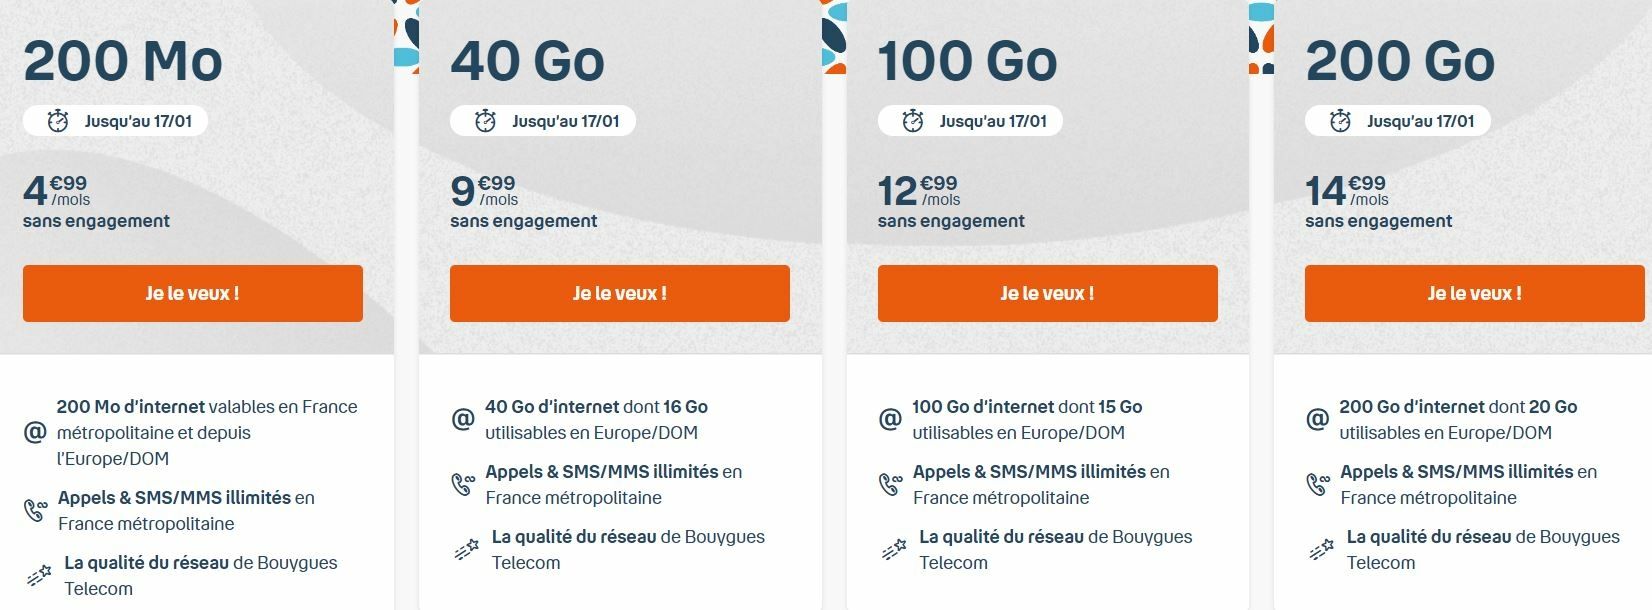 forfait-mobile-very-bouygues-telecom-200-go